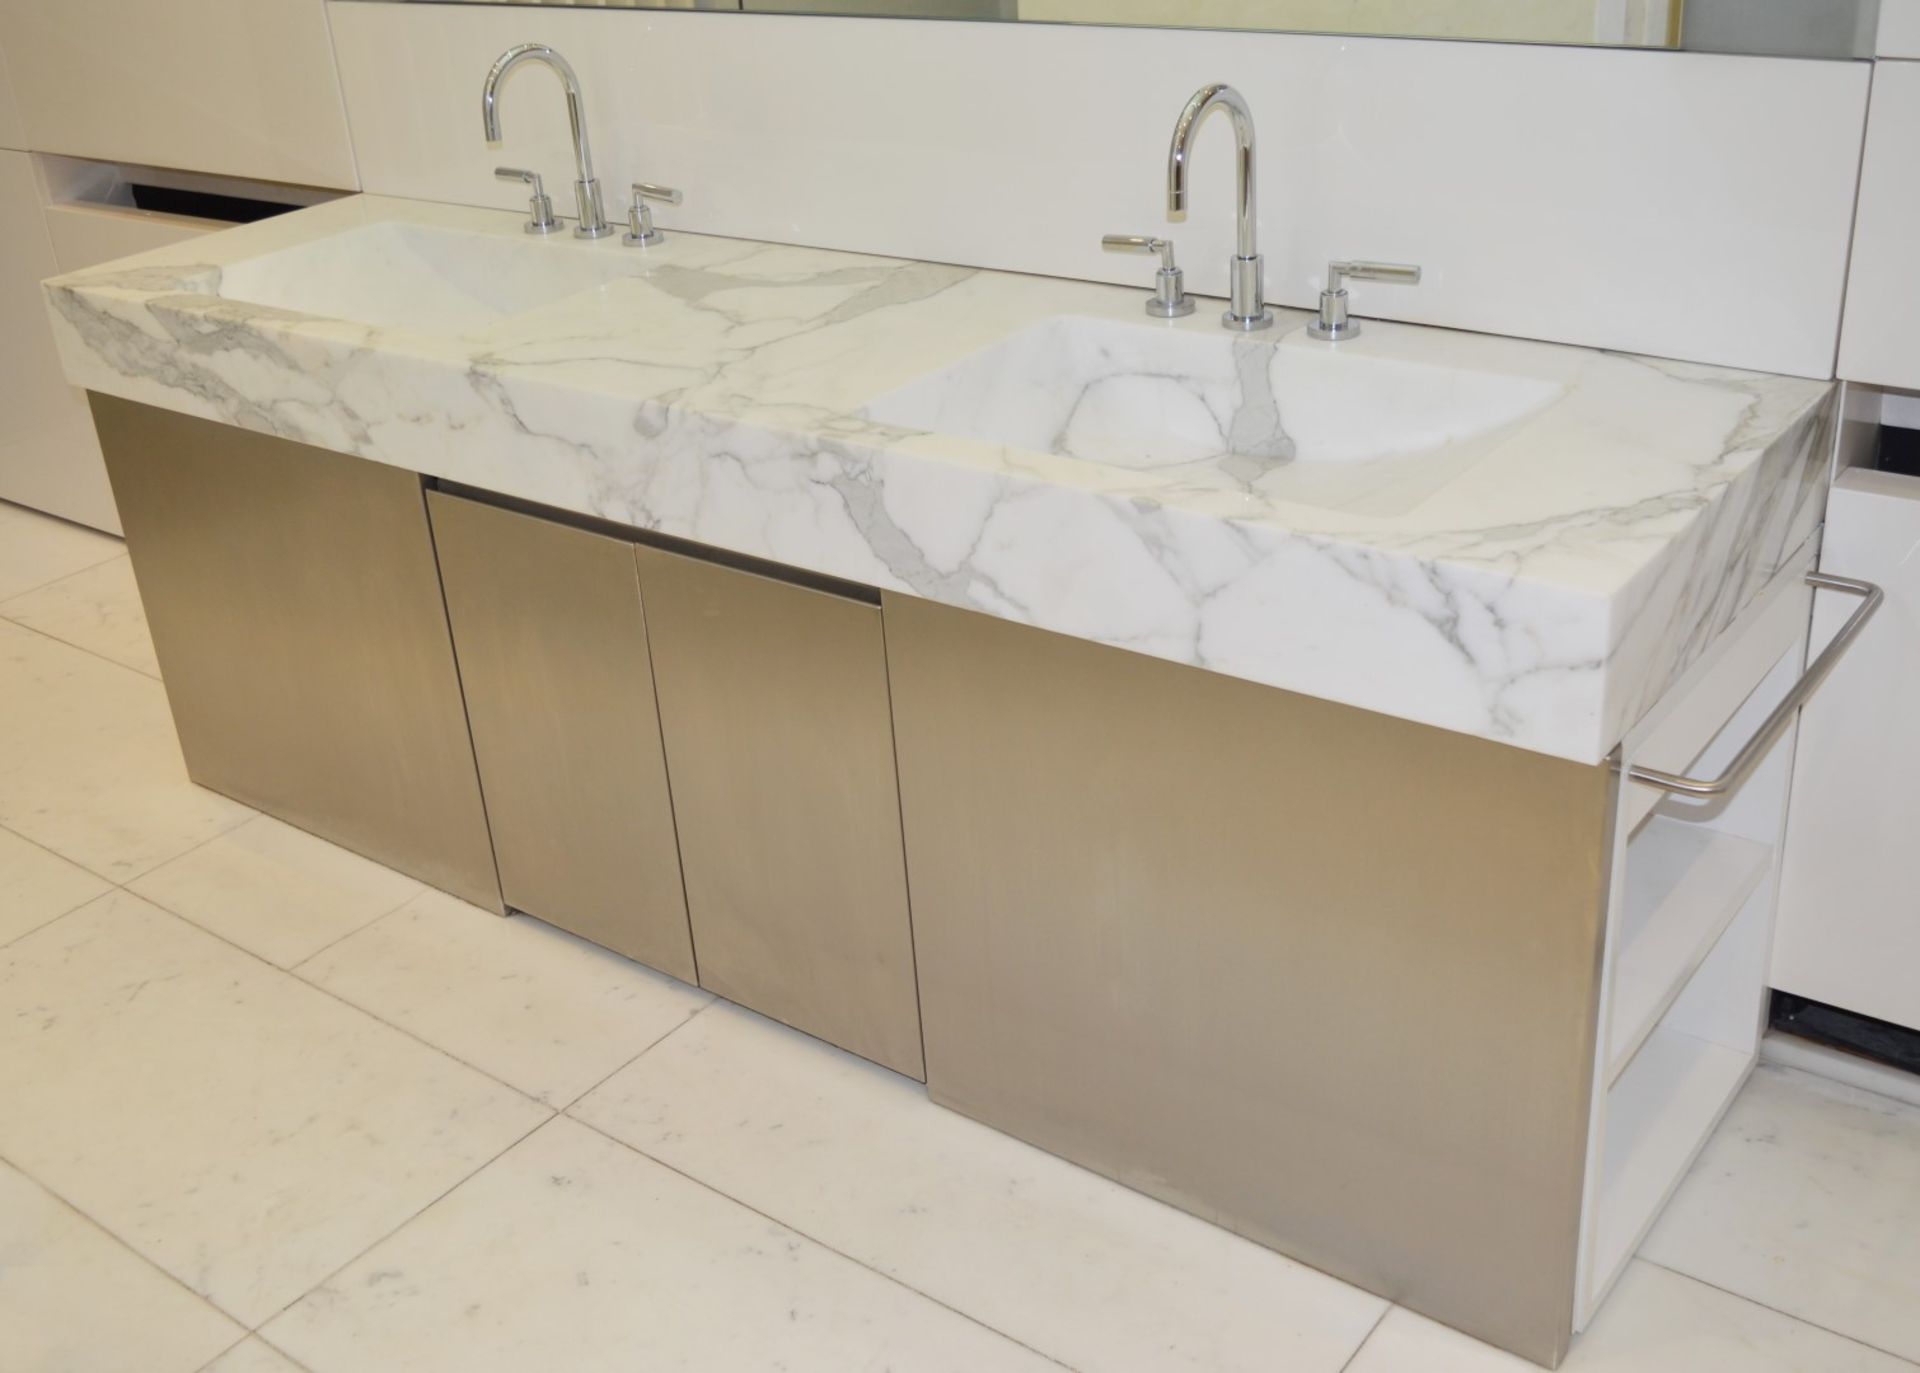 1 x Bespoke His & Hers Marble Bathroom Vanity Unit - Exquisite 7ft Twin Marble Sink Basin With Two - Image 24 of 25